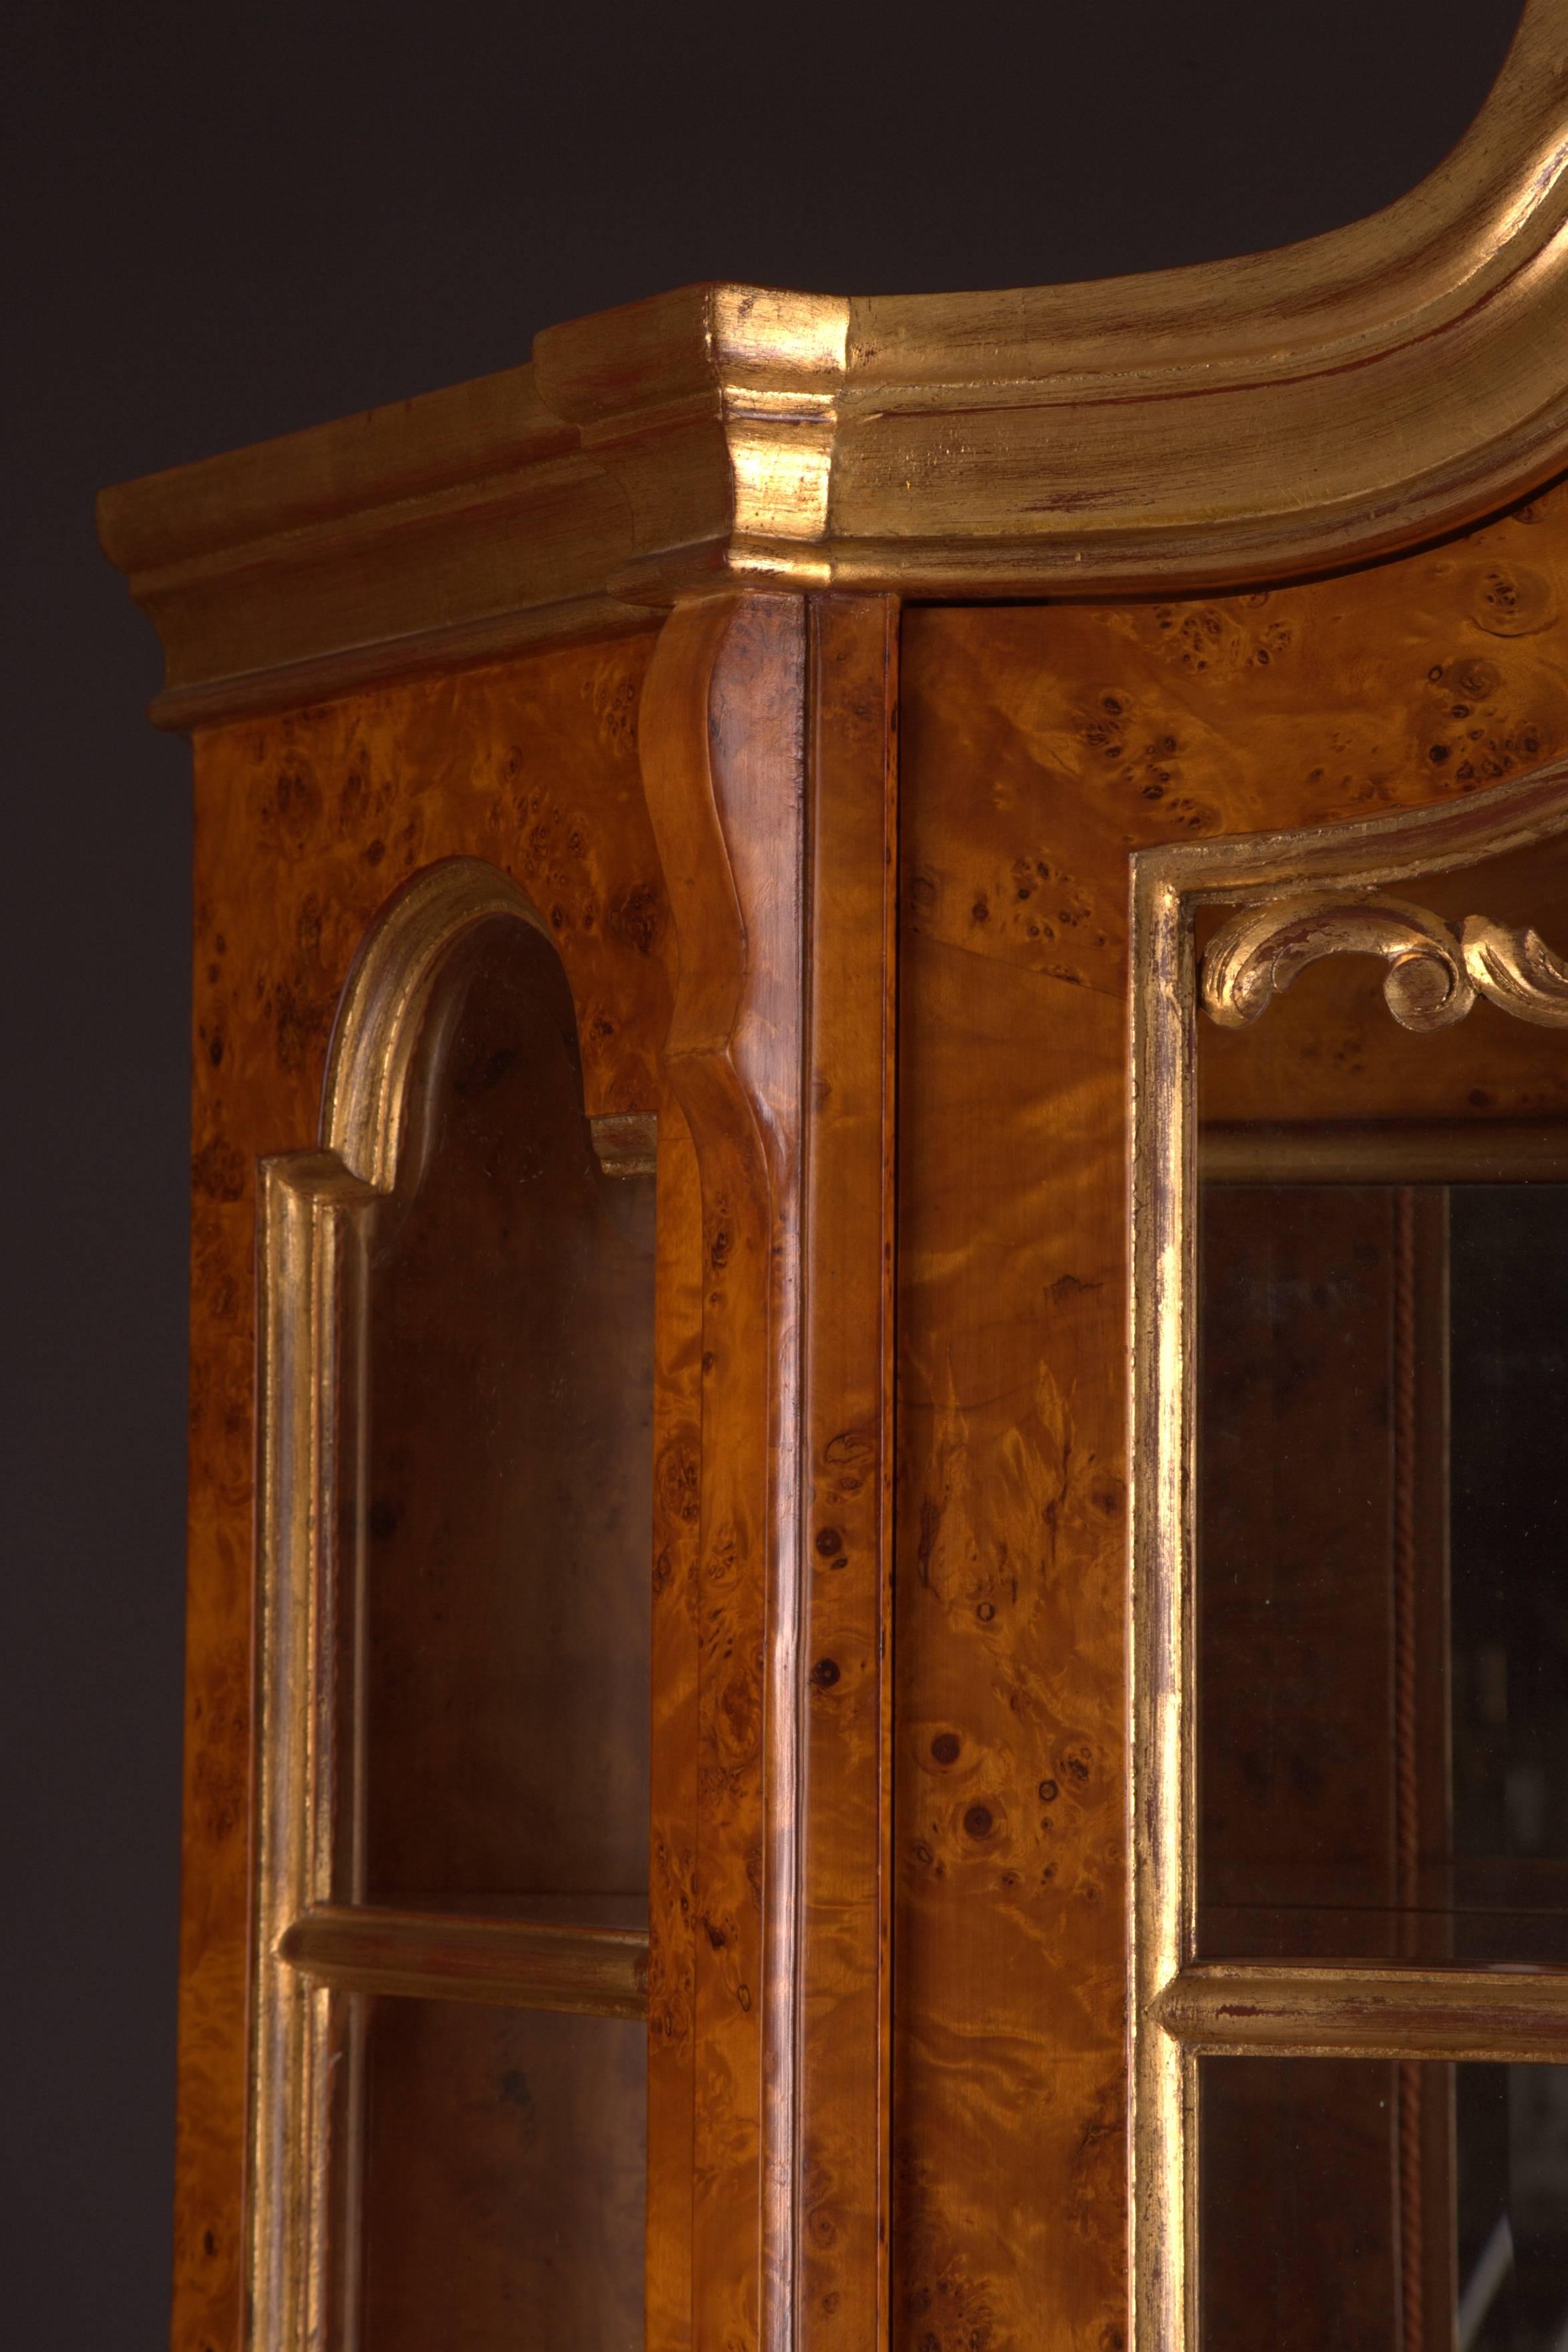 Maple root veneer on solid beech and pine woods. Gilded. Strongly bowed, rofile- framed, one drawered border. Pedestal on strongly claw-feet.